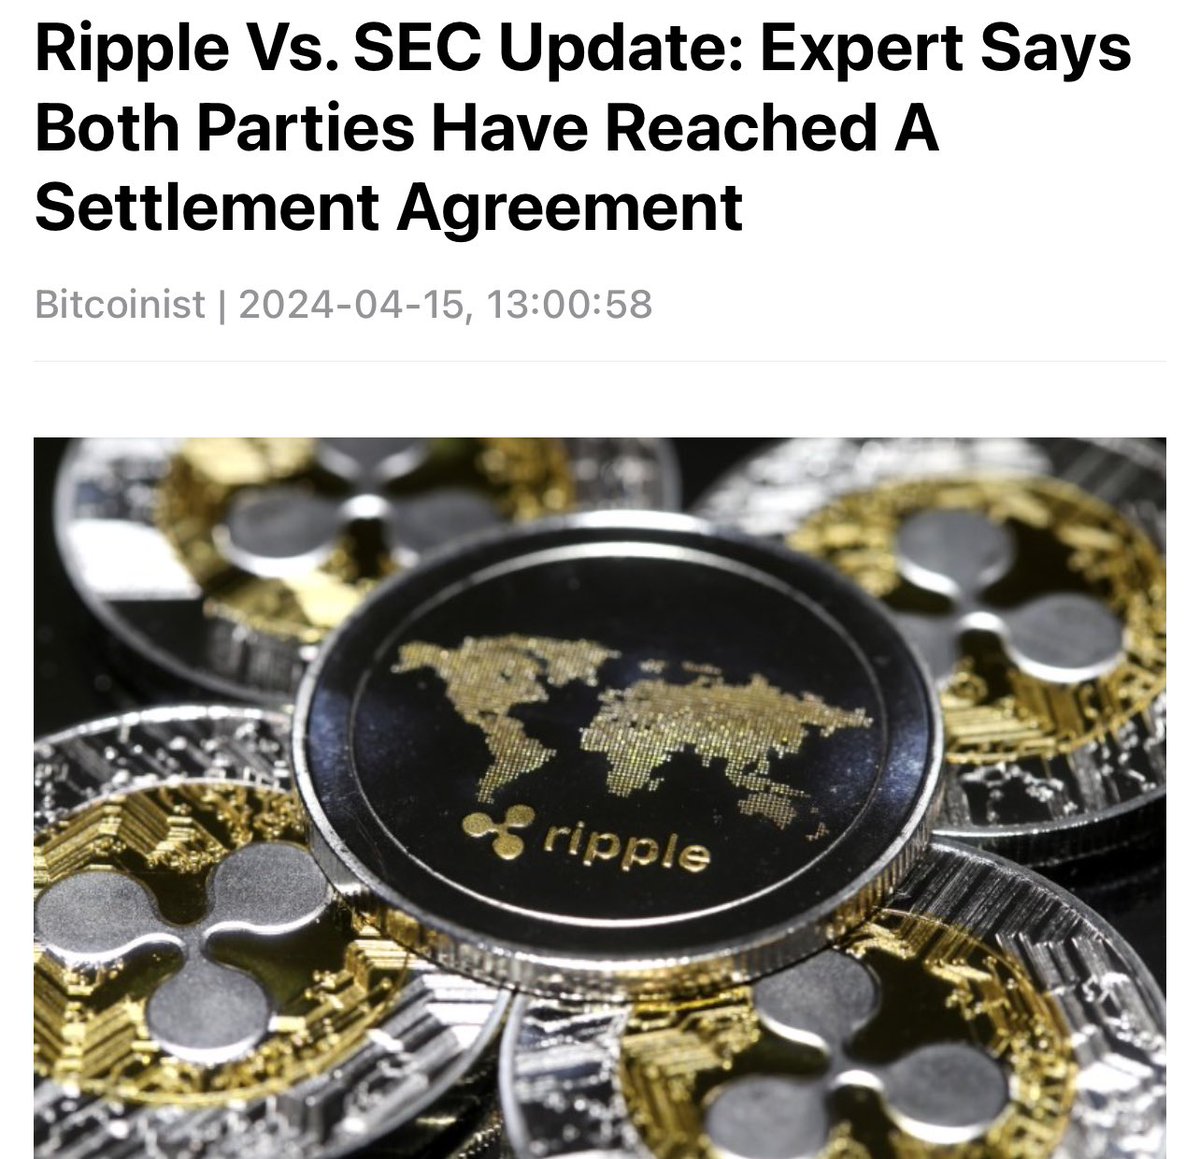 🚨EXPERTS NOW CONFIRM SEC SETTLEMENT WITH RIPPLE LIKELY REACHED AND PASSIVE VOLUMES EXPECTED TO XRPL! TOP #DeFi TOKEN ON XRPL, @TokenCTF EXPTECTED TO SKYROCKET! 🚀 With just $20 billion market cap, CTF token would jump from $0.85 to $748.50 per token!! Its very possible…